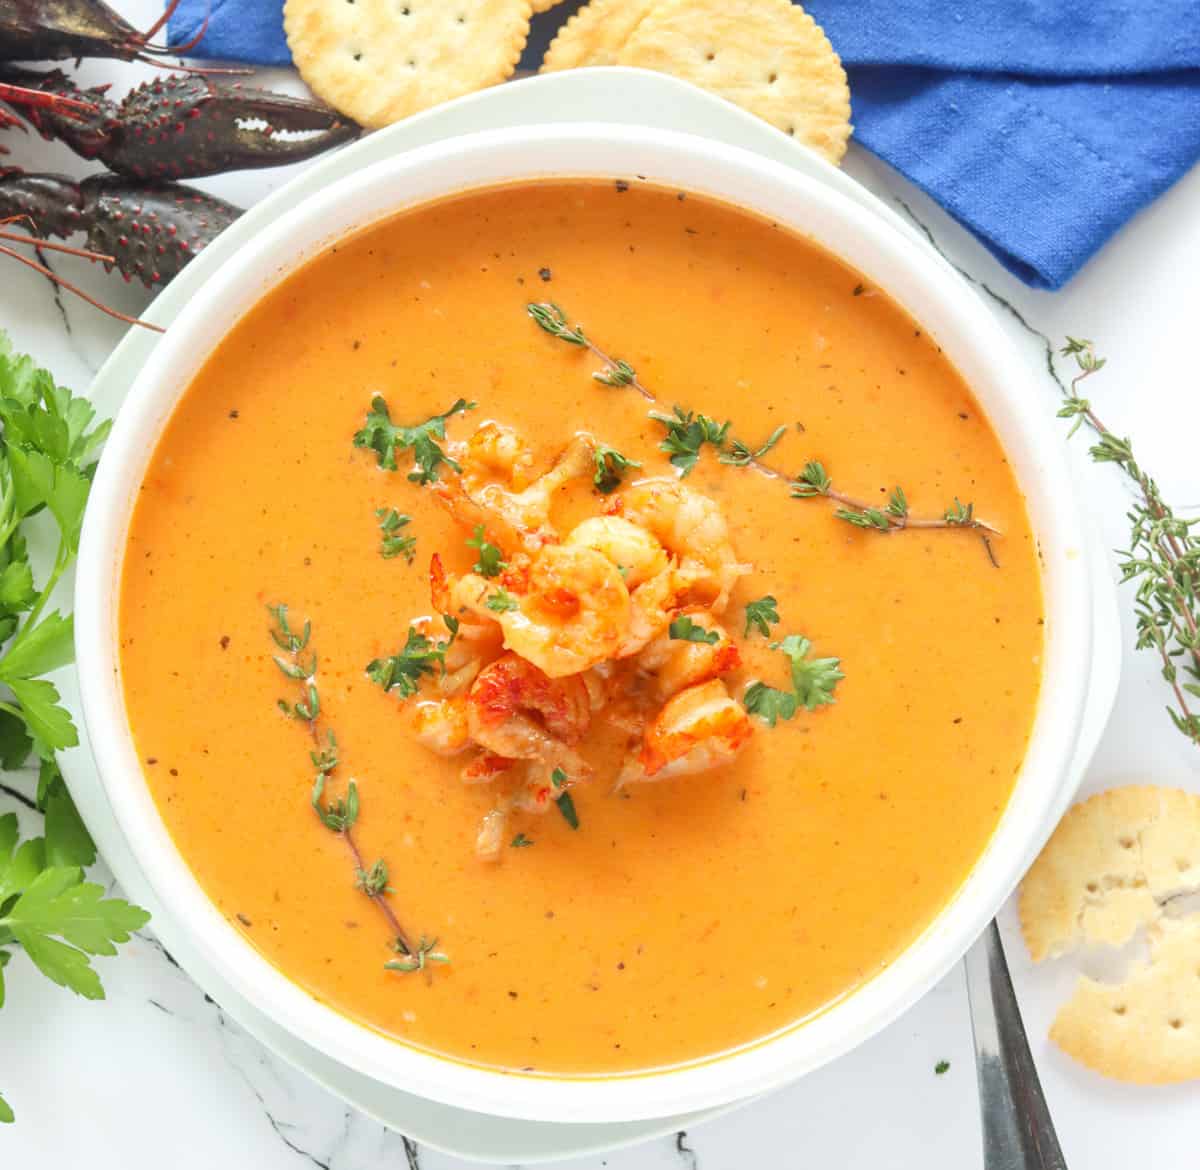 A bowl of hearty crawfish bisque ready to enjoy